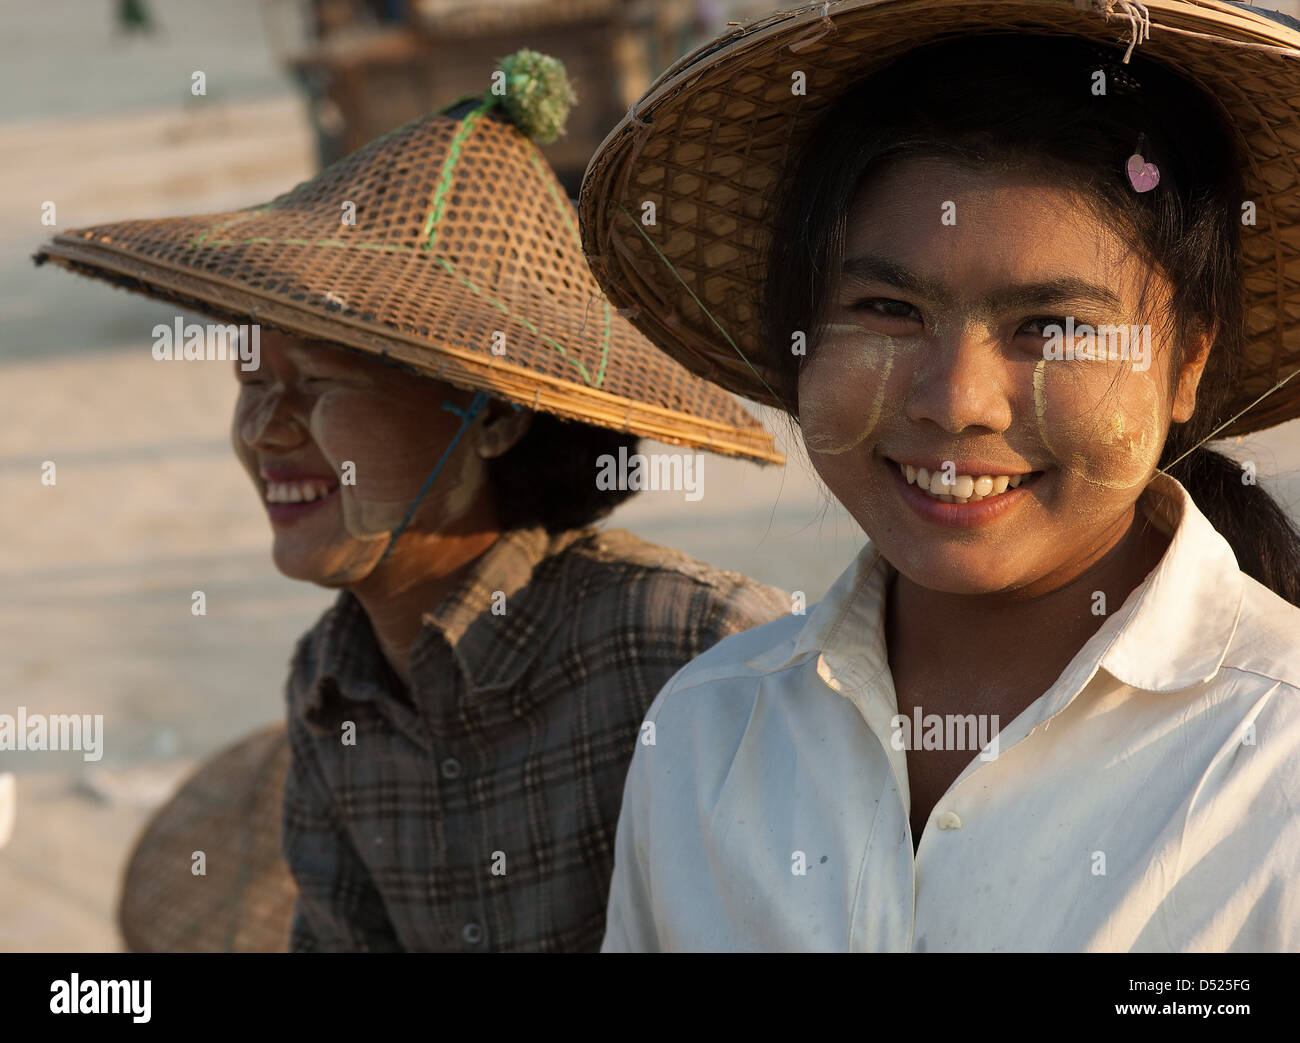 This young Burmese woman has, as is common, rubbed paste from thanaka bark on her face to protect it from the fierce sun. Stock Photo